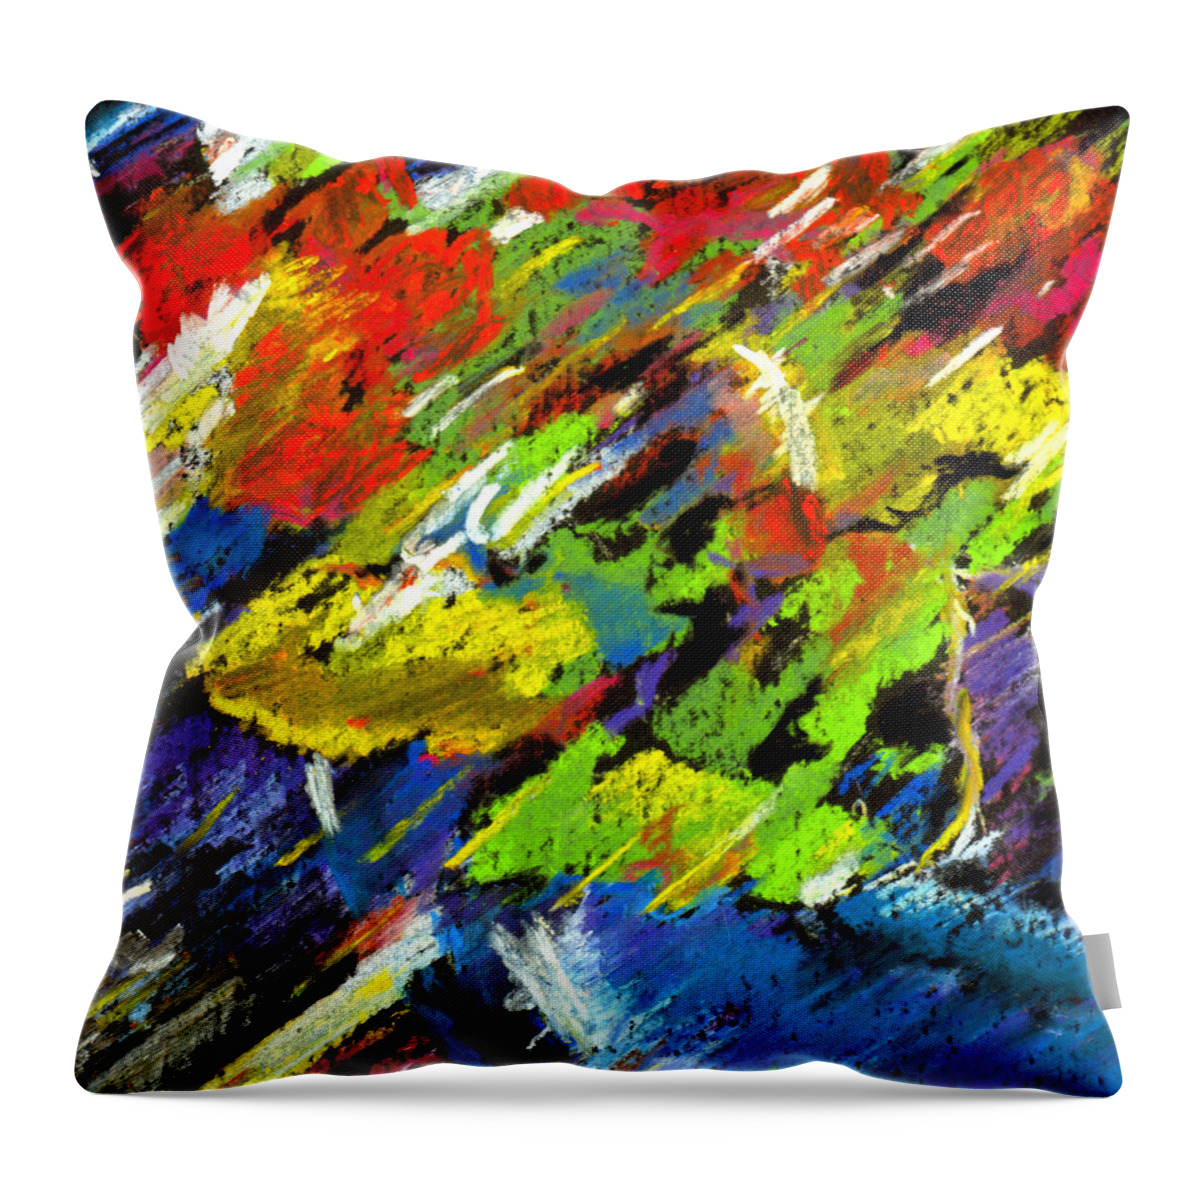 Contemporary Painting Throw Pillow featuring the painting Colorful Impressions by Tanya Filichkin